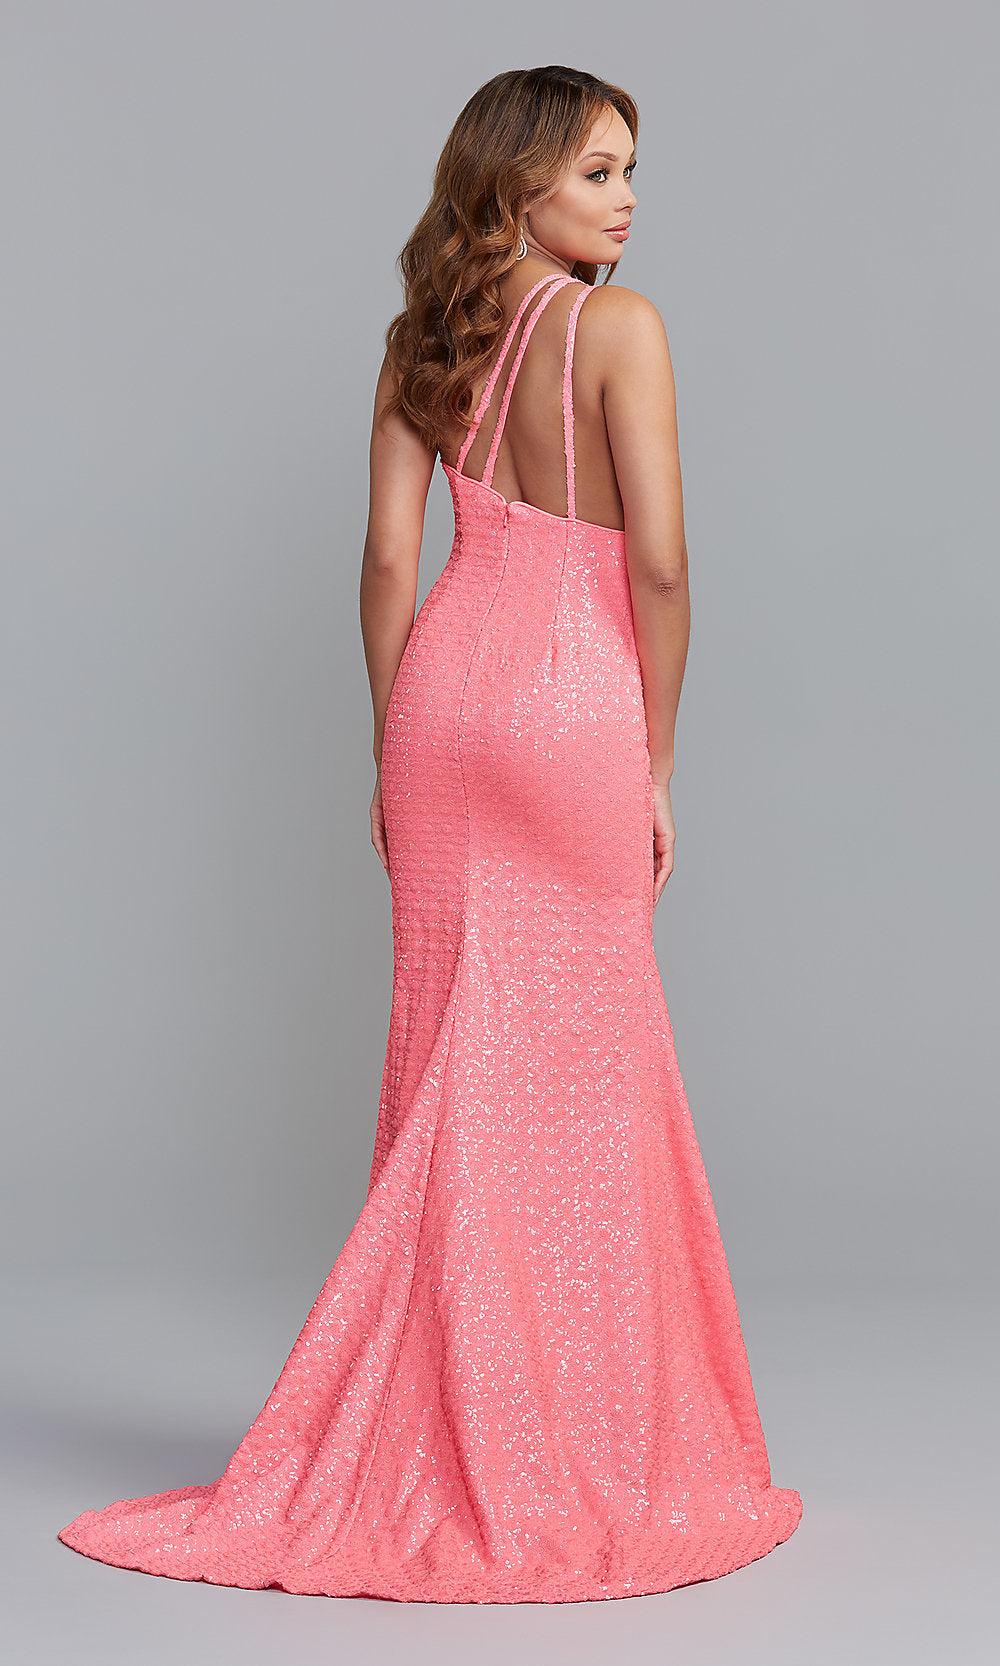 PromGirl One-Shoulder Long Prom Dress in Neon Pink